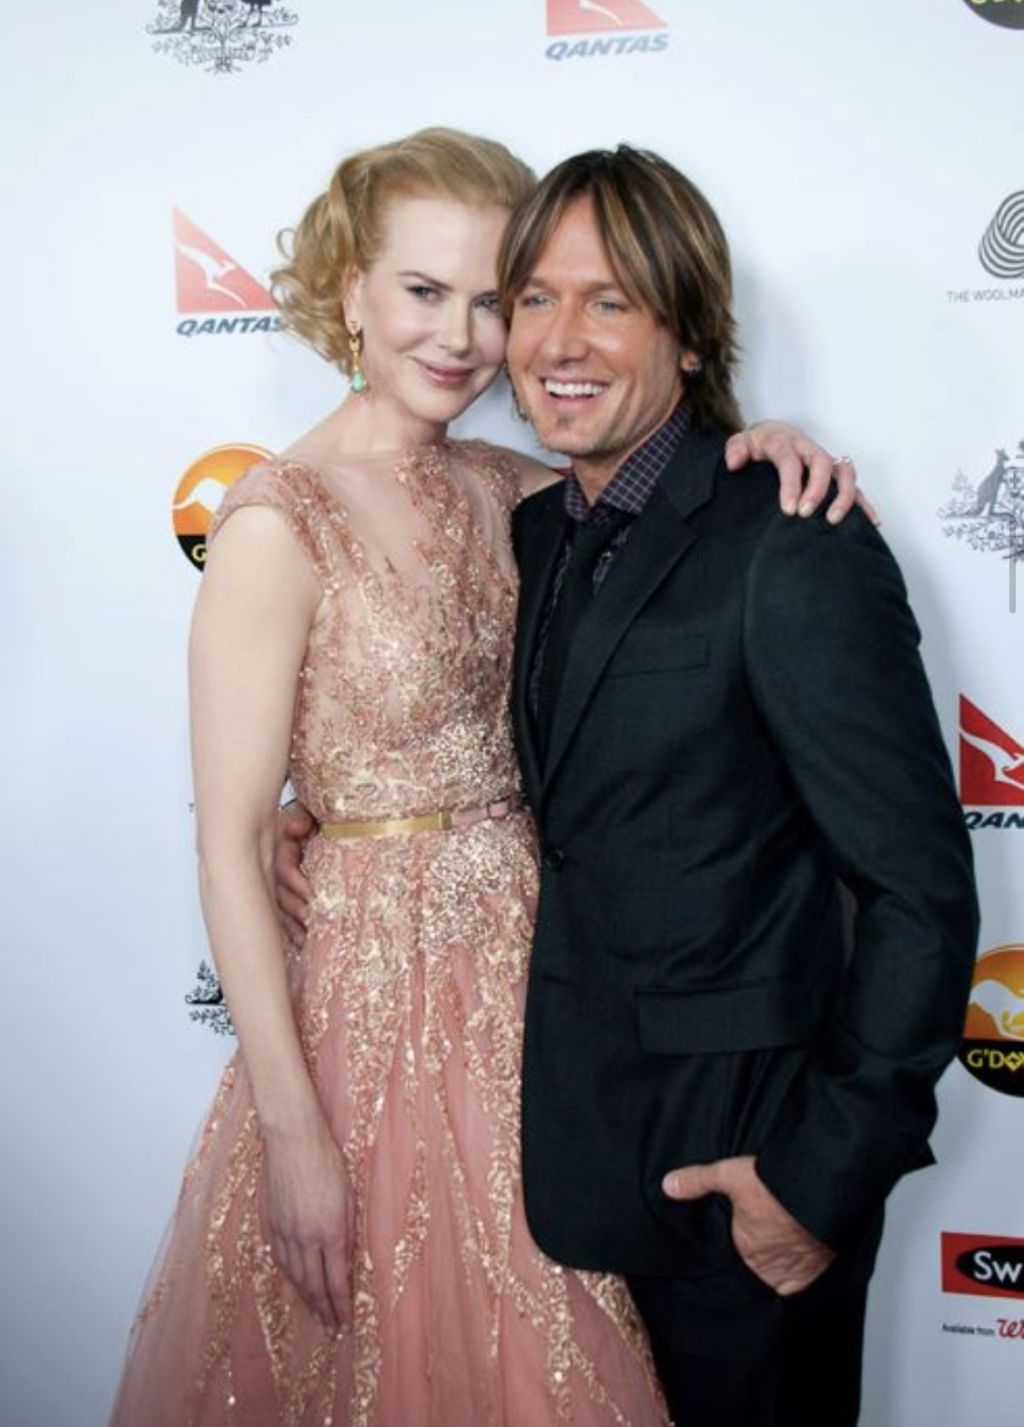 Keith Urban and Nicole Kidman already own the adjoining two penthouses in the Latitude building.